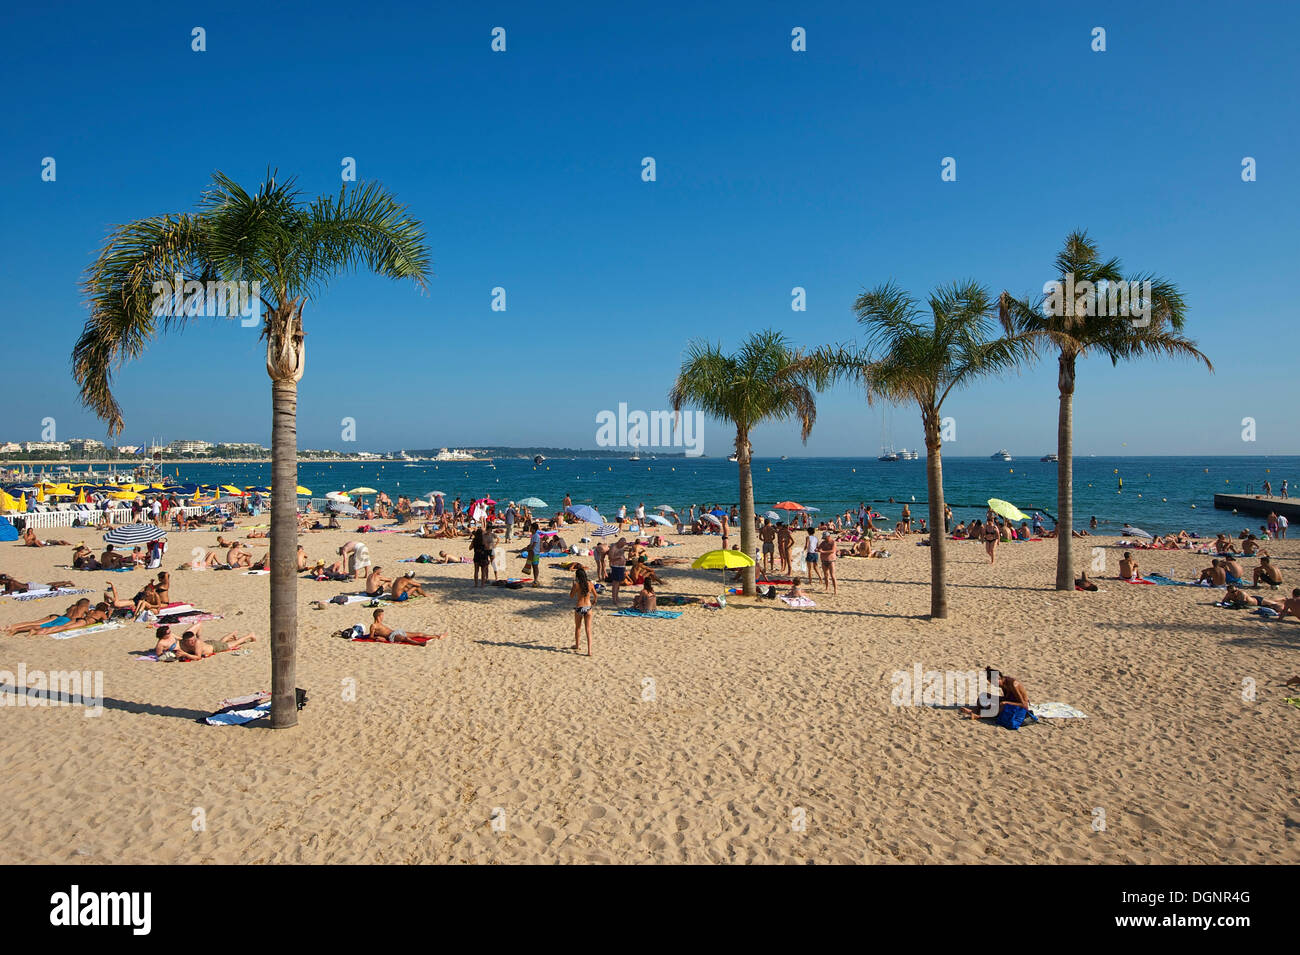 Beach on the Croisette, Cannes, French Riviera, Alpes-Maritimes, Provence-Alpes-Côte d’Azur, France Stock Photo